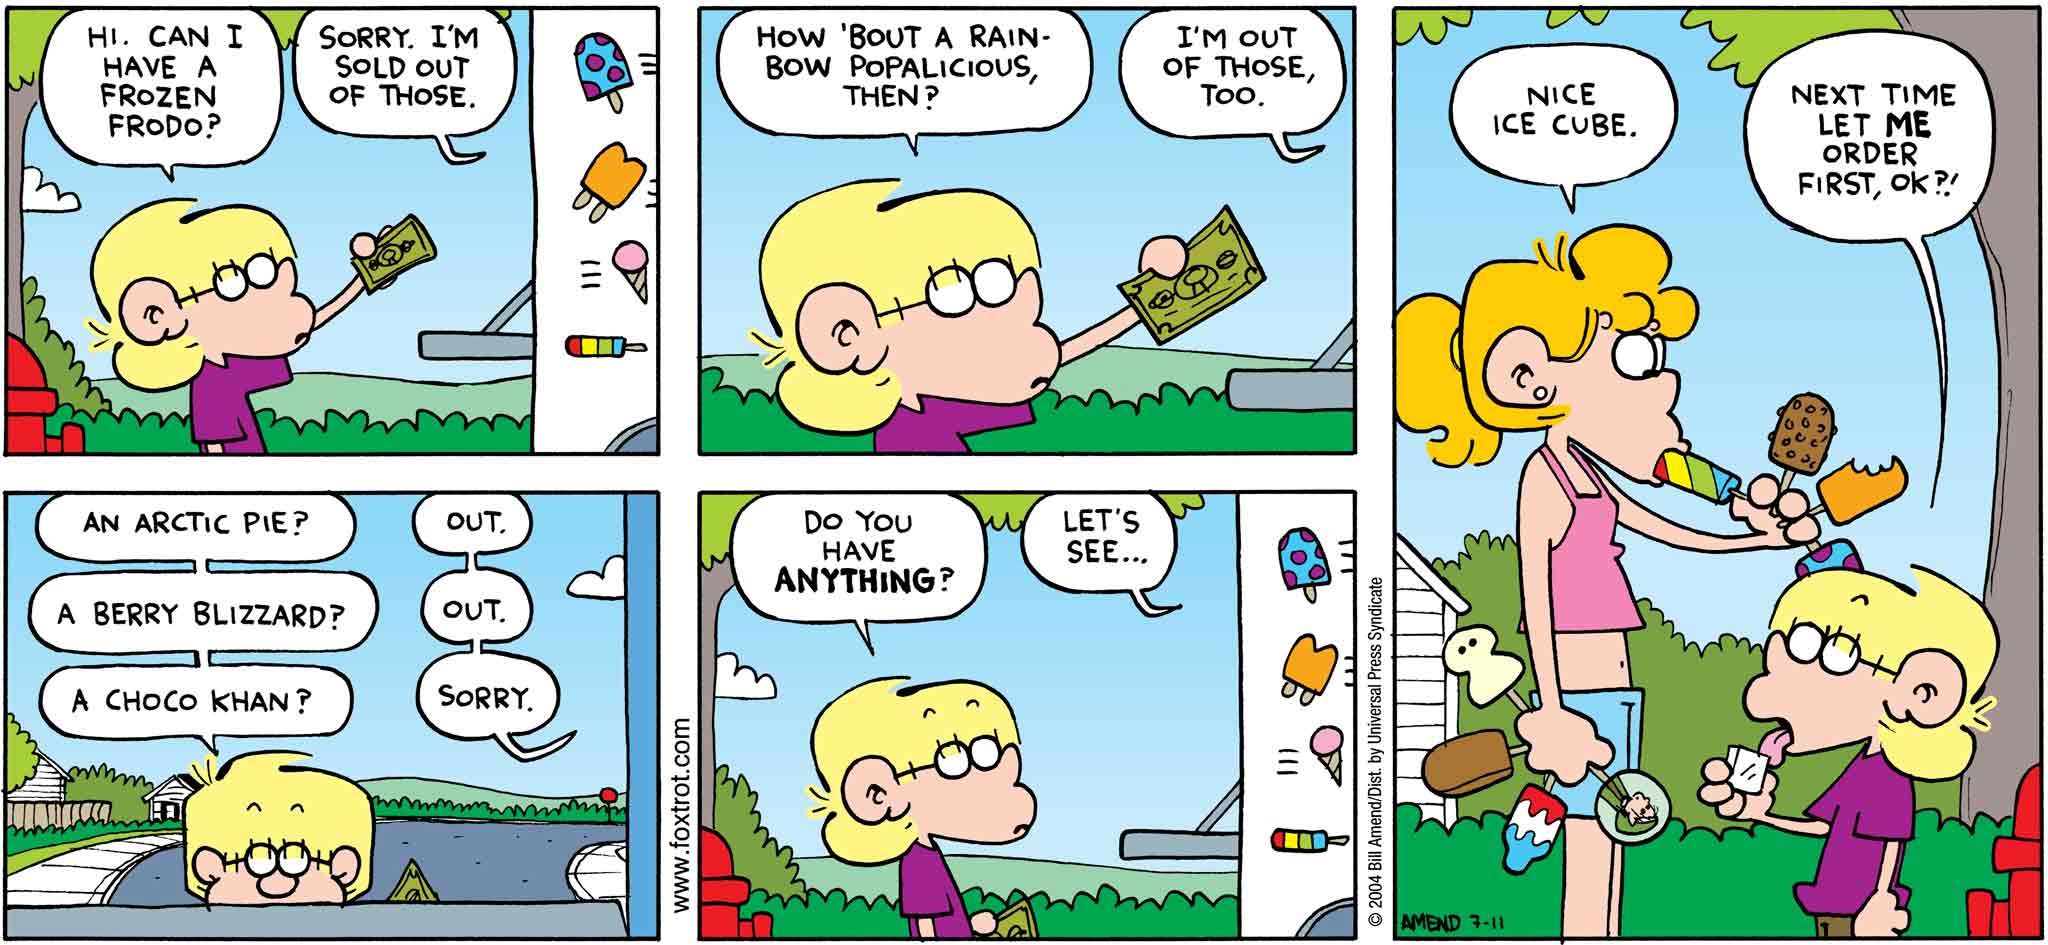 FoxTrot by Bill Amend July 11, 2004 - Summer Comics - Jason: Hi. Can I have a Frozen Frodo? Ice Cream Truck Driver: Sorry. I'm sold out of those. Jason: How 'bout a Rainbow Popalicious, then? Ice Cream Truck Driver: I'm out of those, too. Jason: An Arctic Pie? Ice Cream Truck Driver: Out. Jason A Berry Blizzard? Ice Cream Truck Driver: Out. Jason: A Choco Khan? Ice Cream Truck Driver: Sorry. Jason: Do you have anything? Ice Cream Truck Driver: Let's see... Paige: Nice ice cube. Jason: Next time let me order first, ok?!